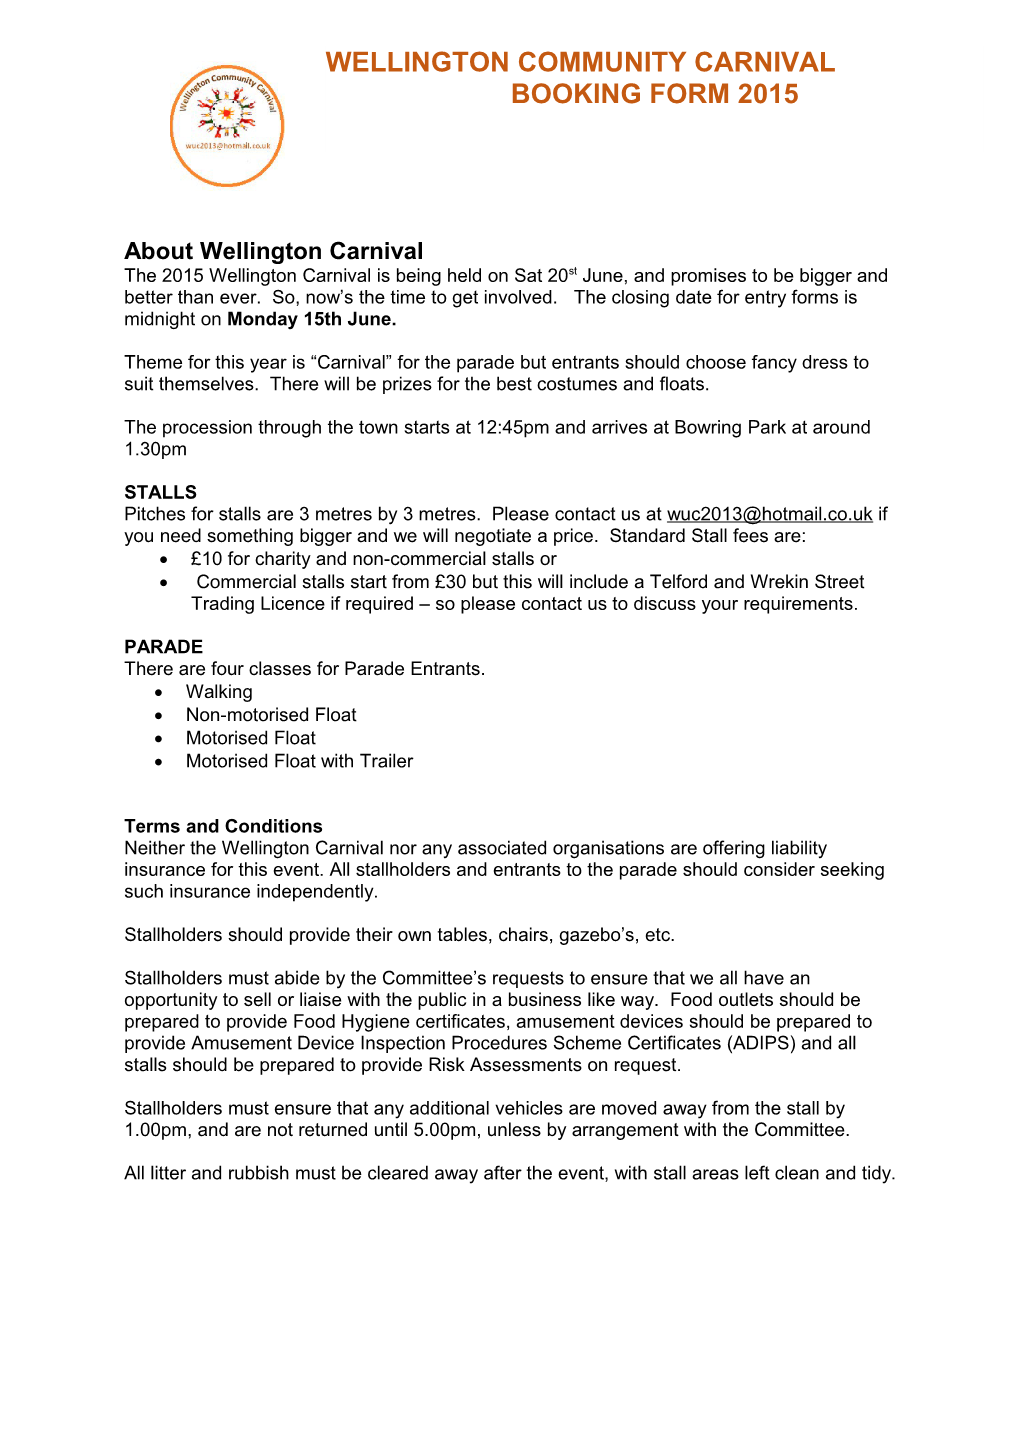 Wellington Carnival Booking Form 2013-03-14